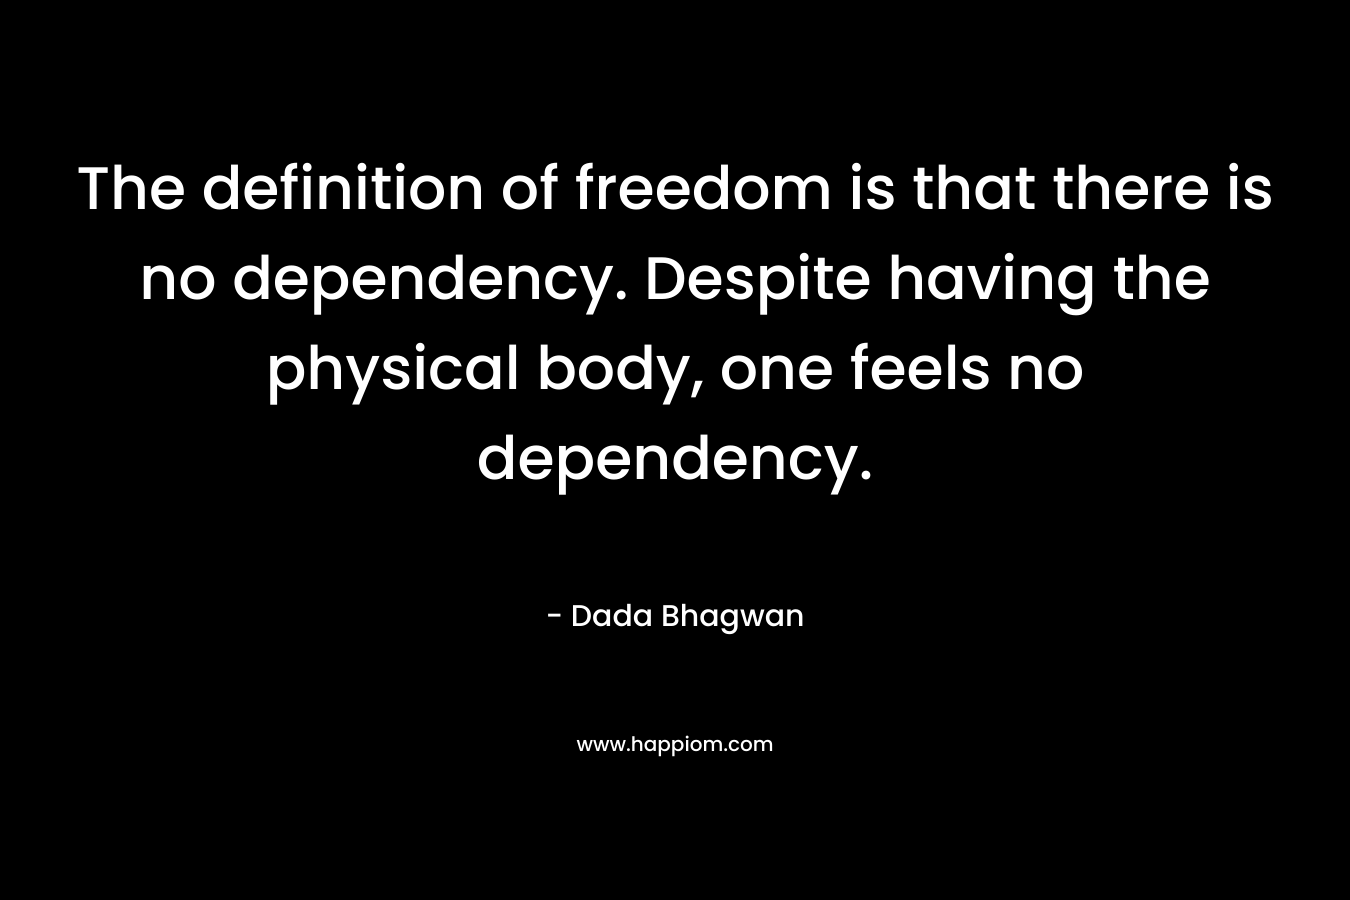 The definition of freedom is that there is no dependency. Despite having the physical body, one feels no dependency. – Dada Bhagwan